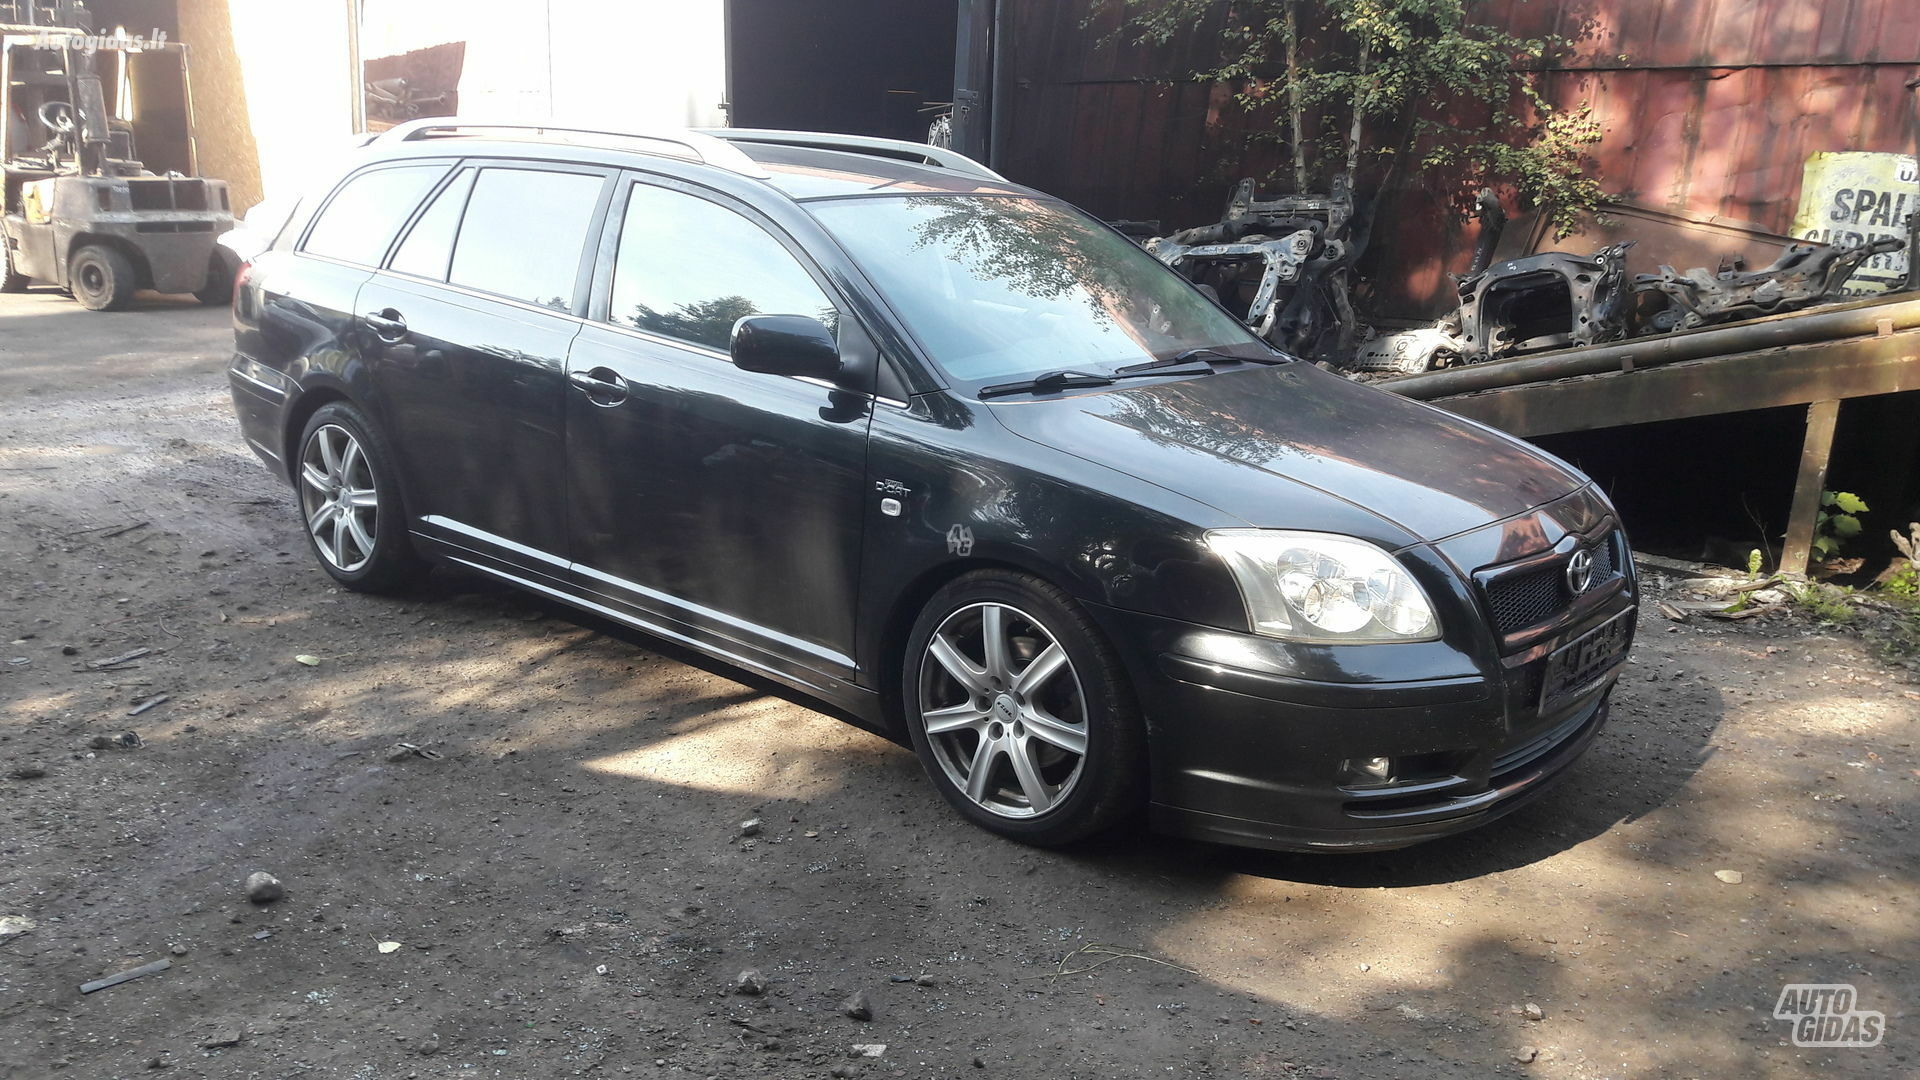 Toyota Avensis 2005 y parts